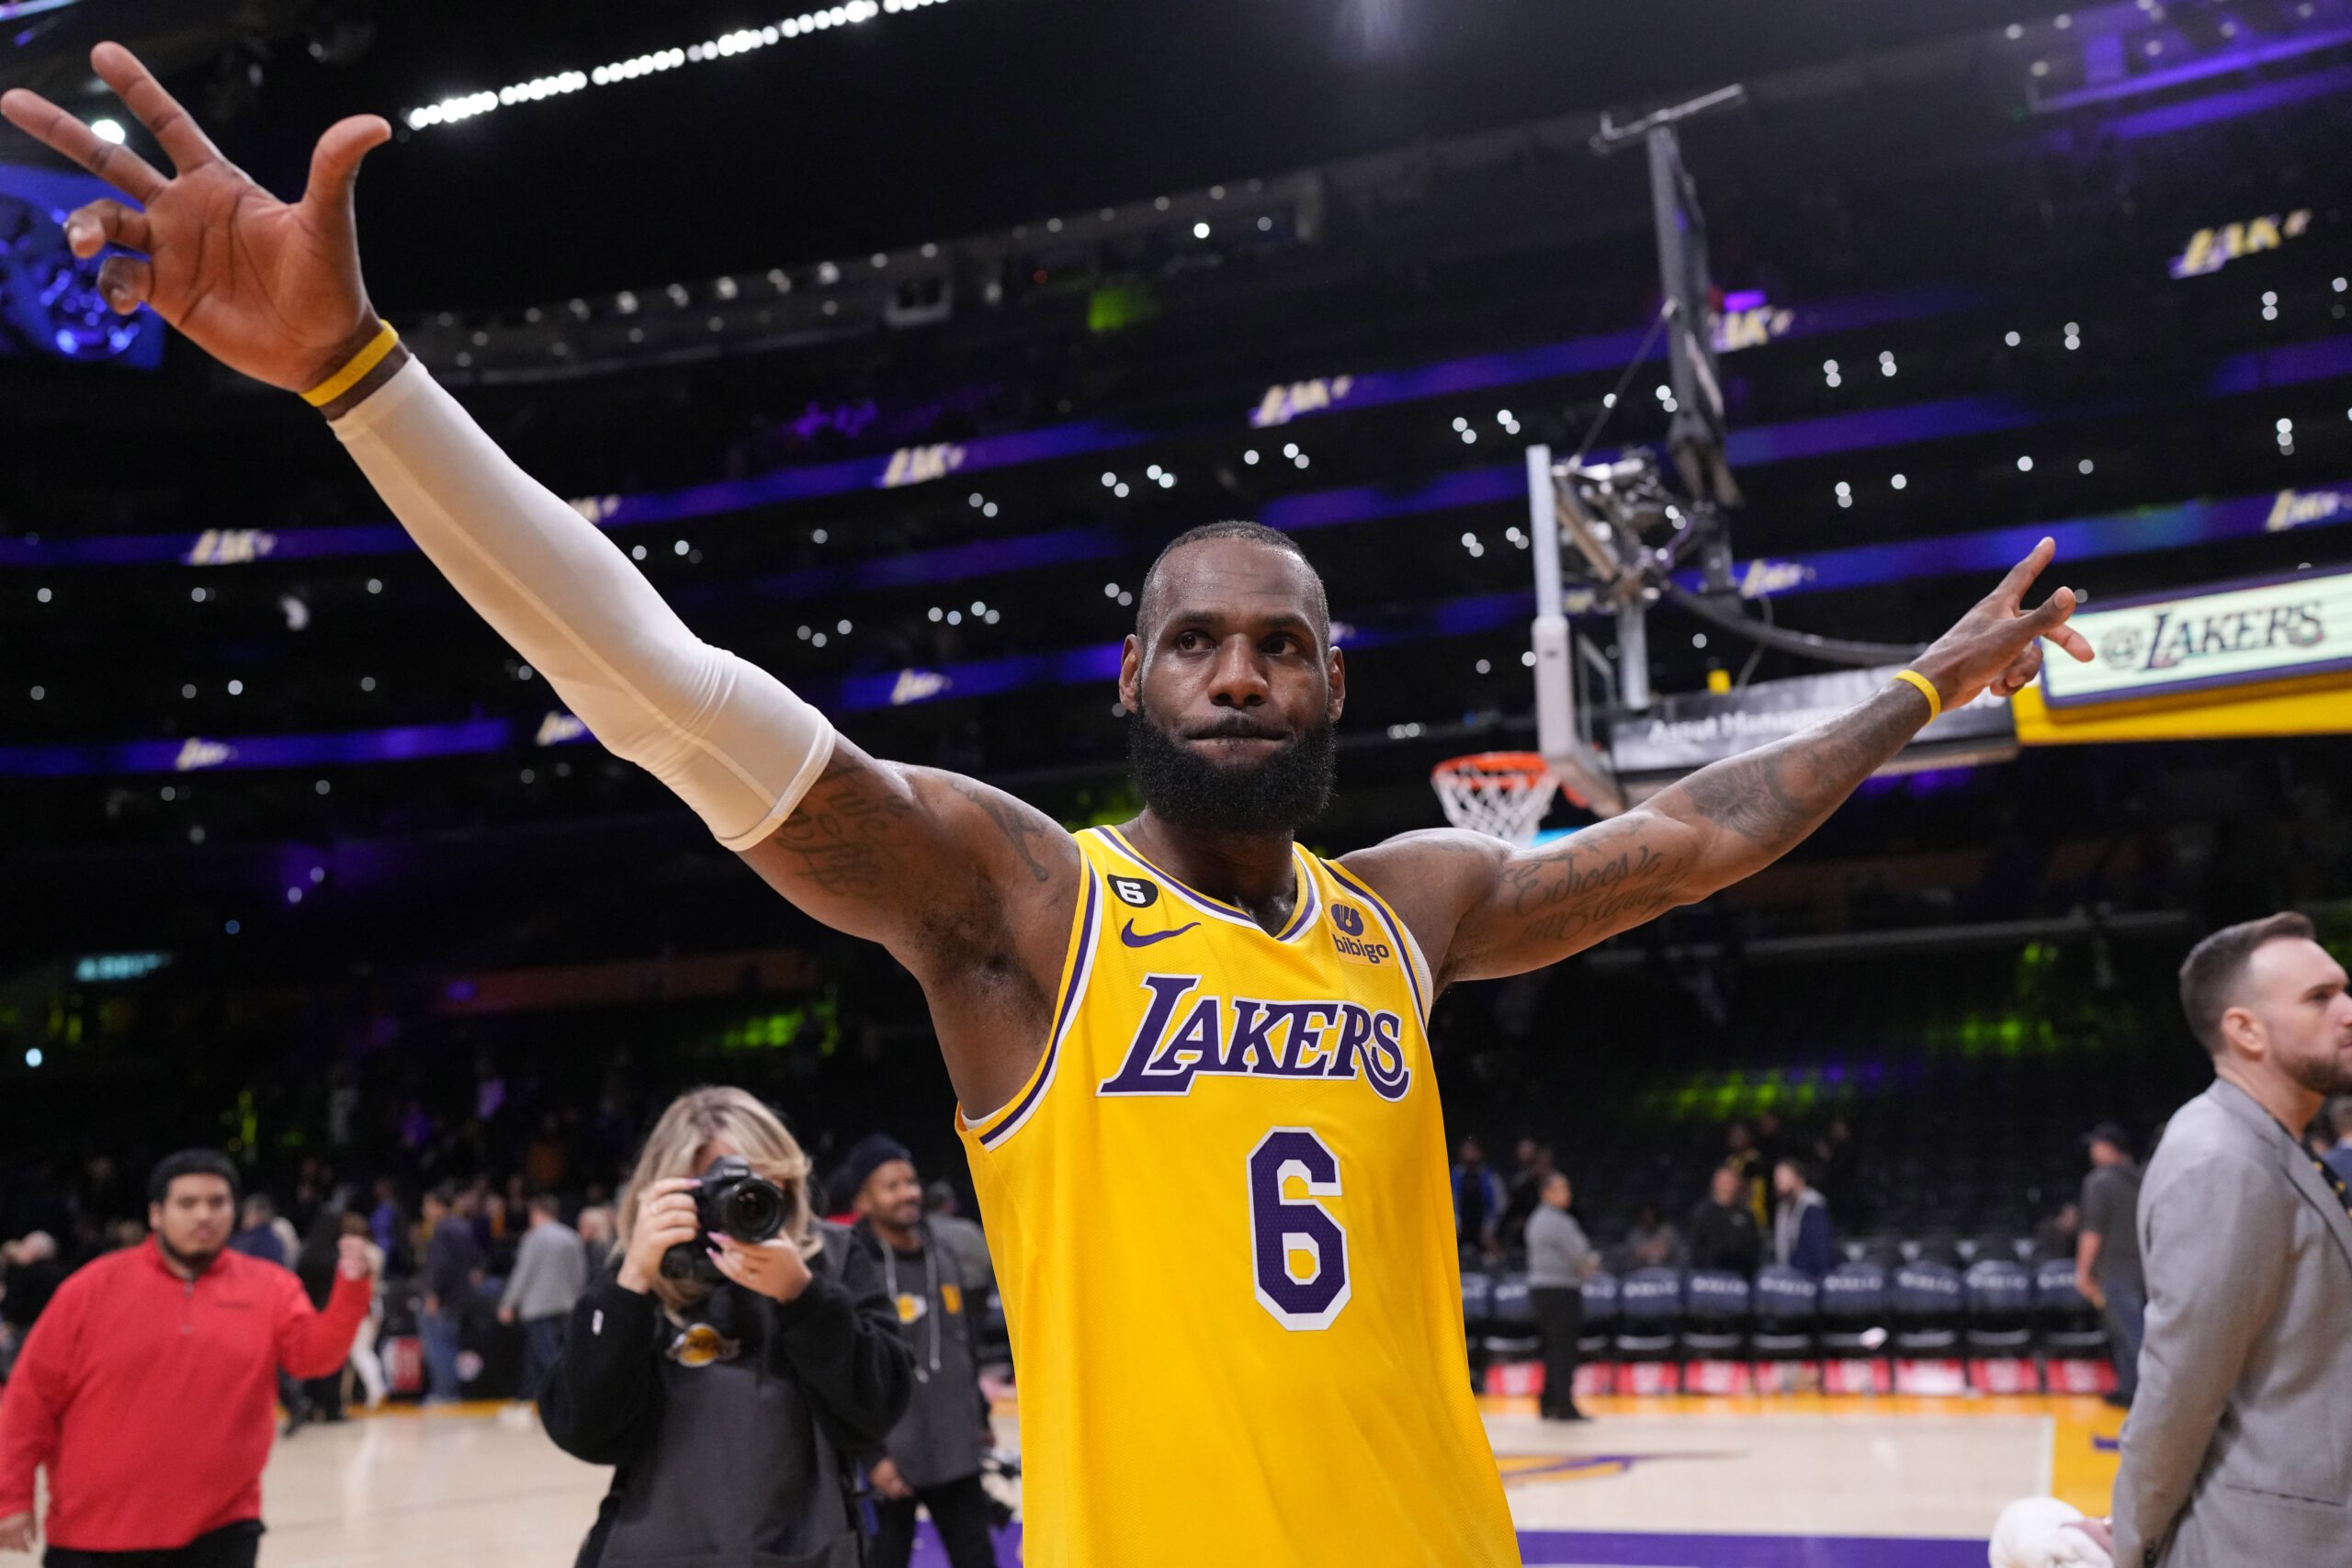 LeBron drops 48 as Lakers commit record-low 2 turnovers in win over Rockets